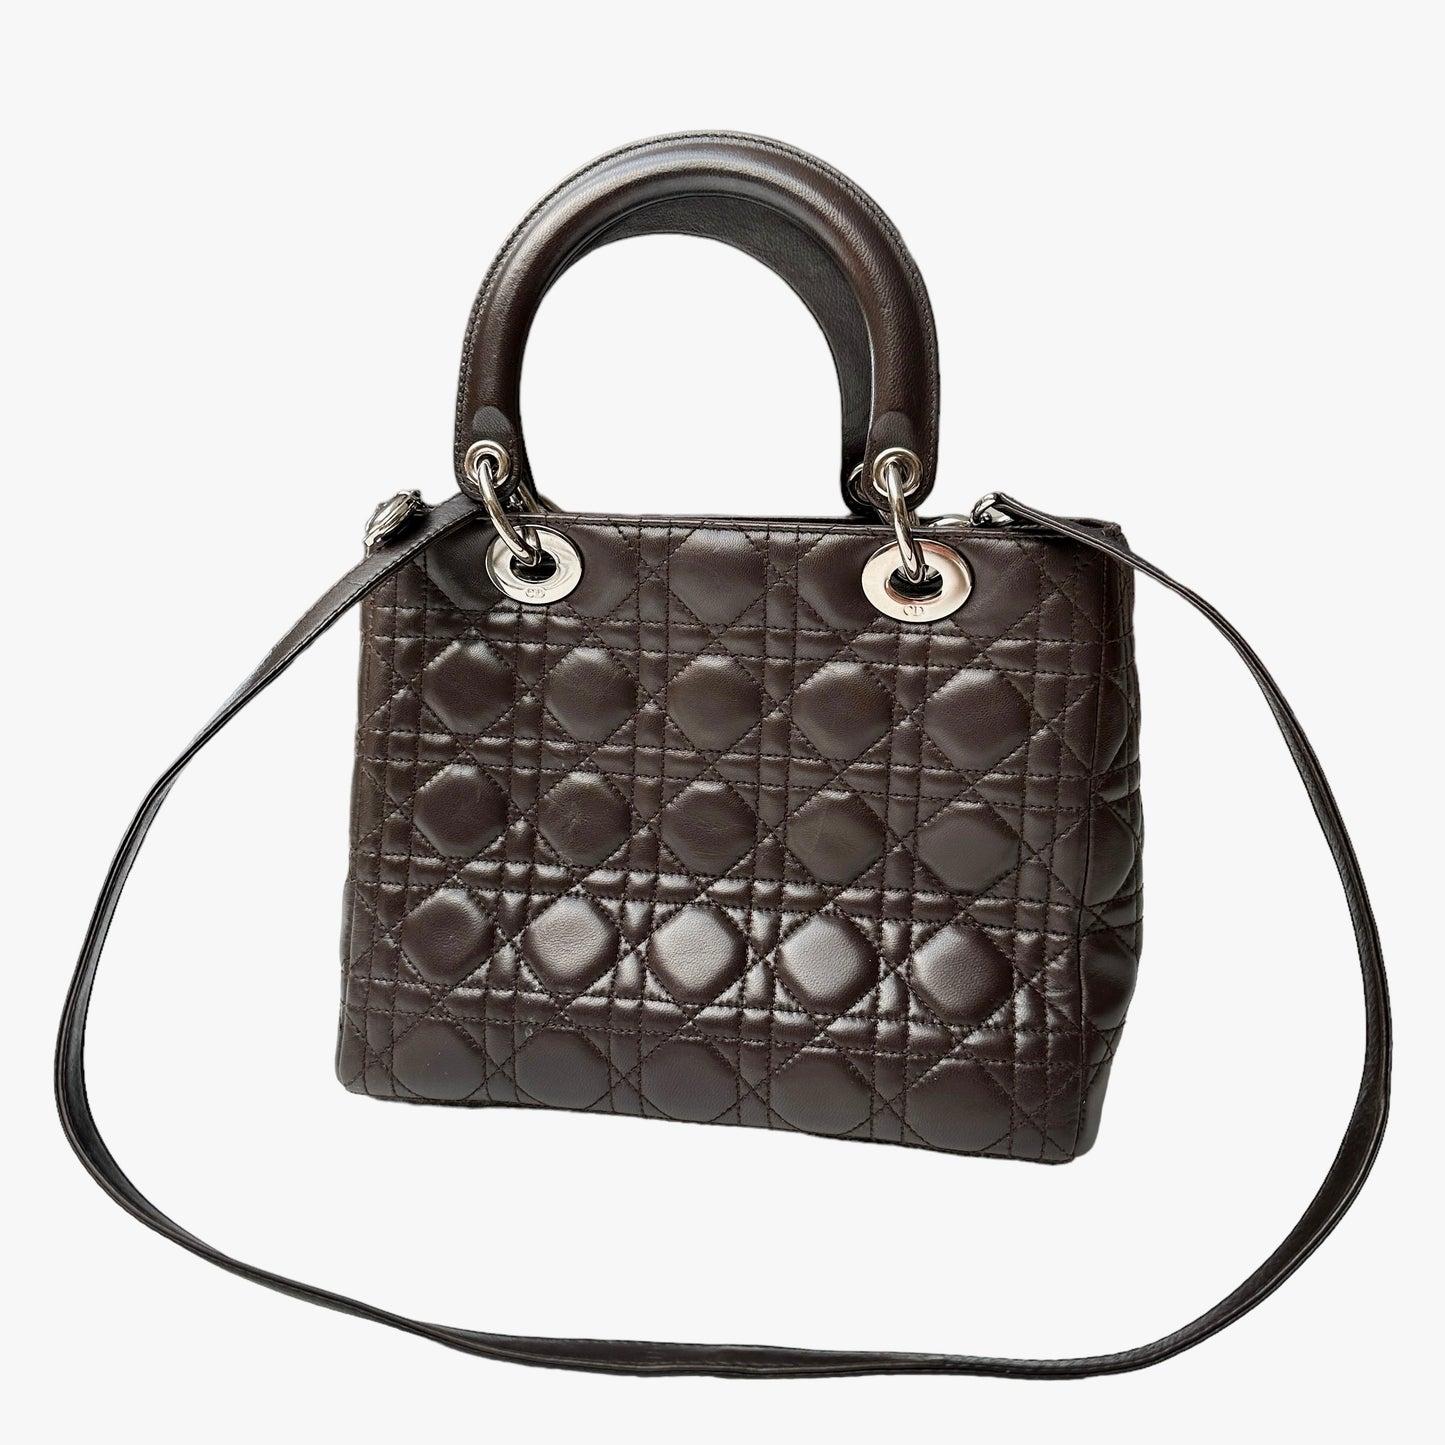 Chocolate Brown Lady Dior Tote